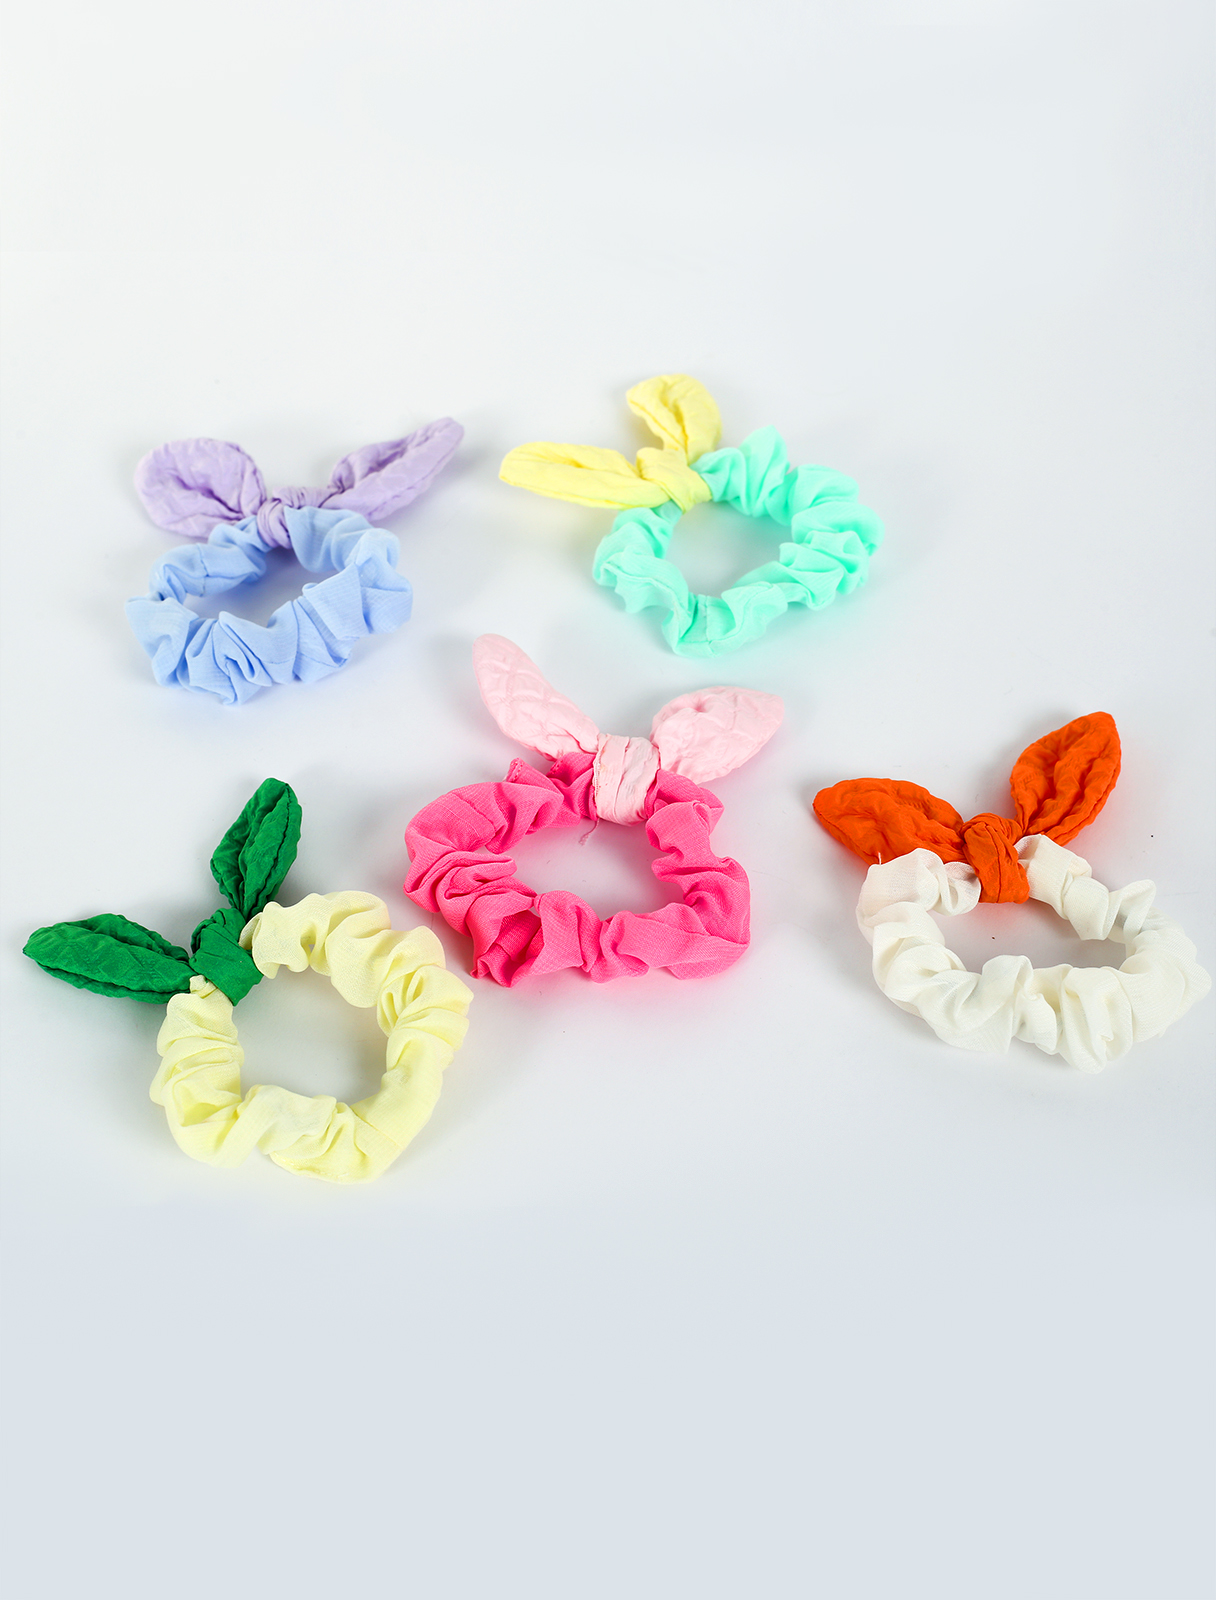 A hair tie, fabric colors, in the form of a bow